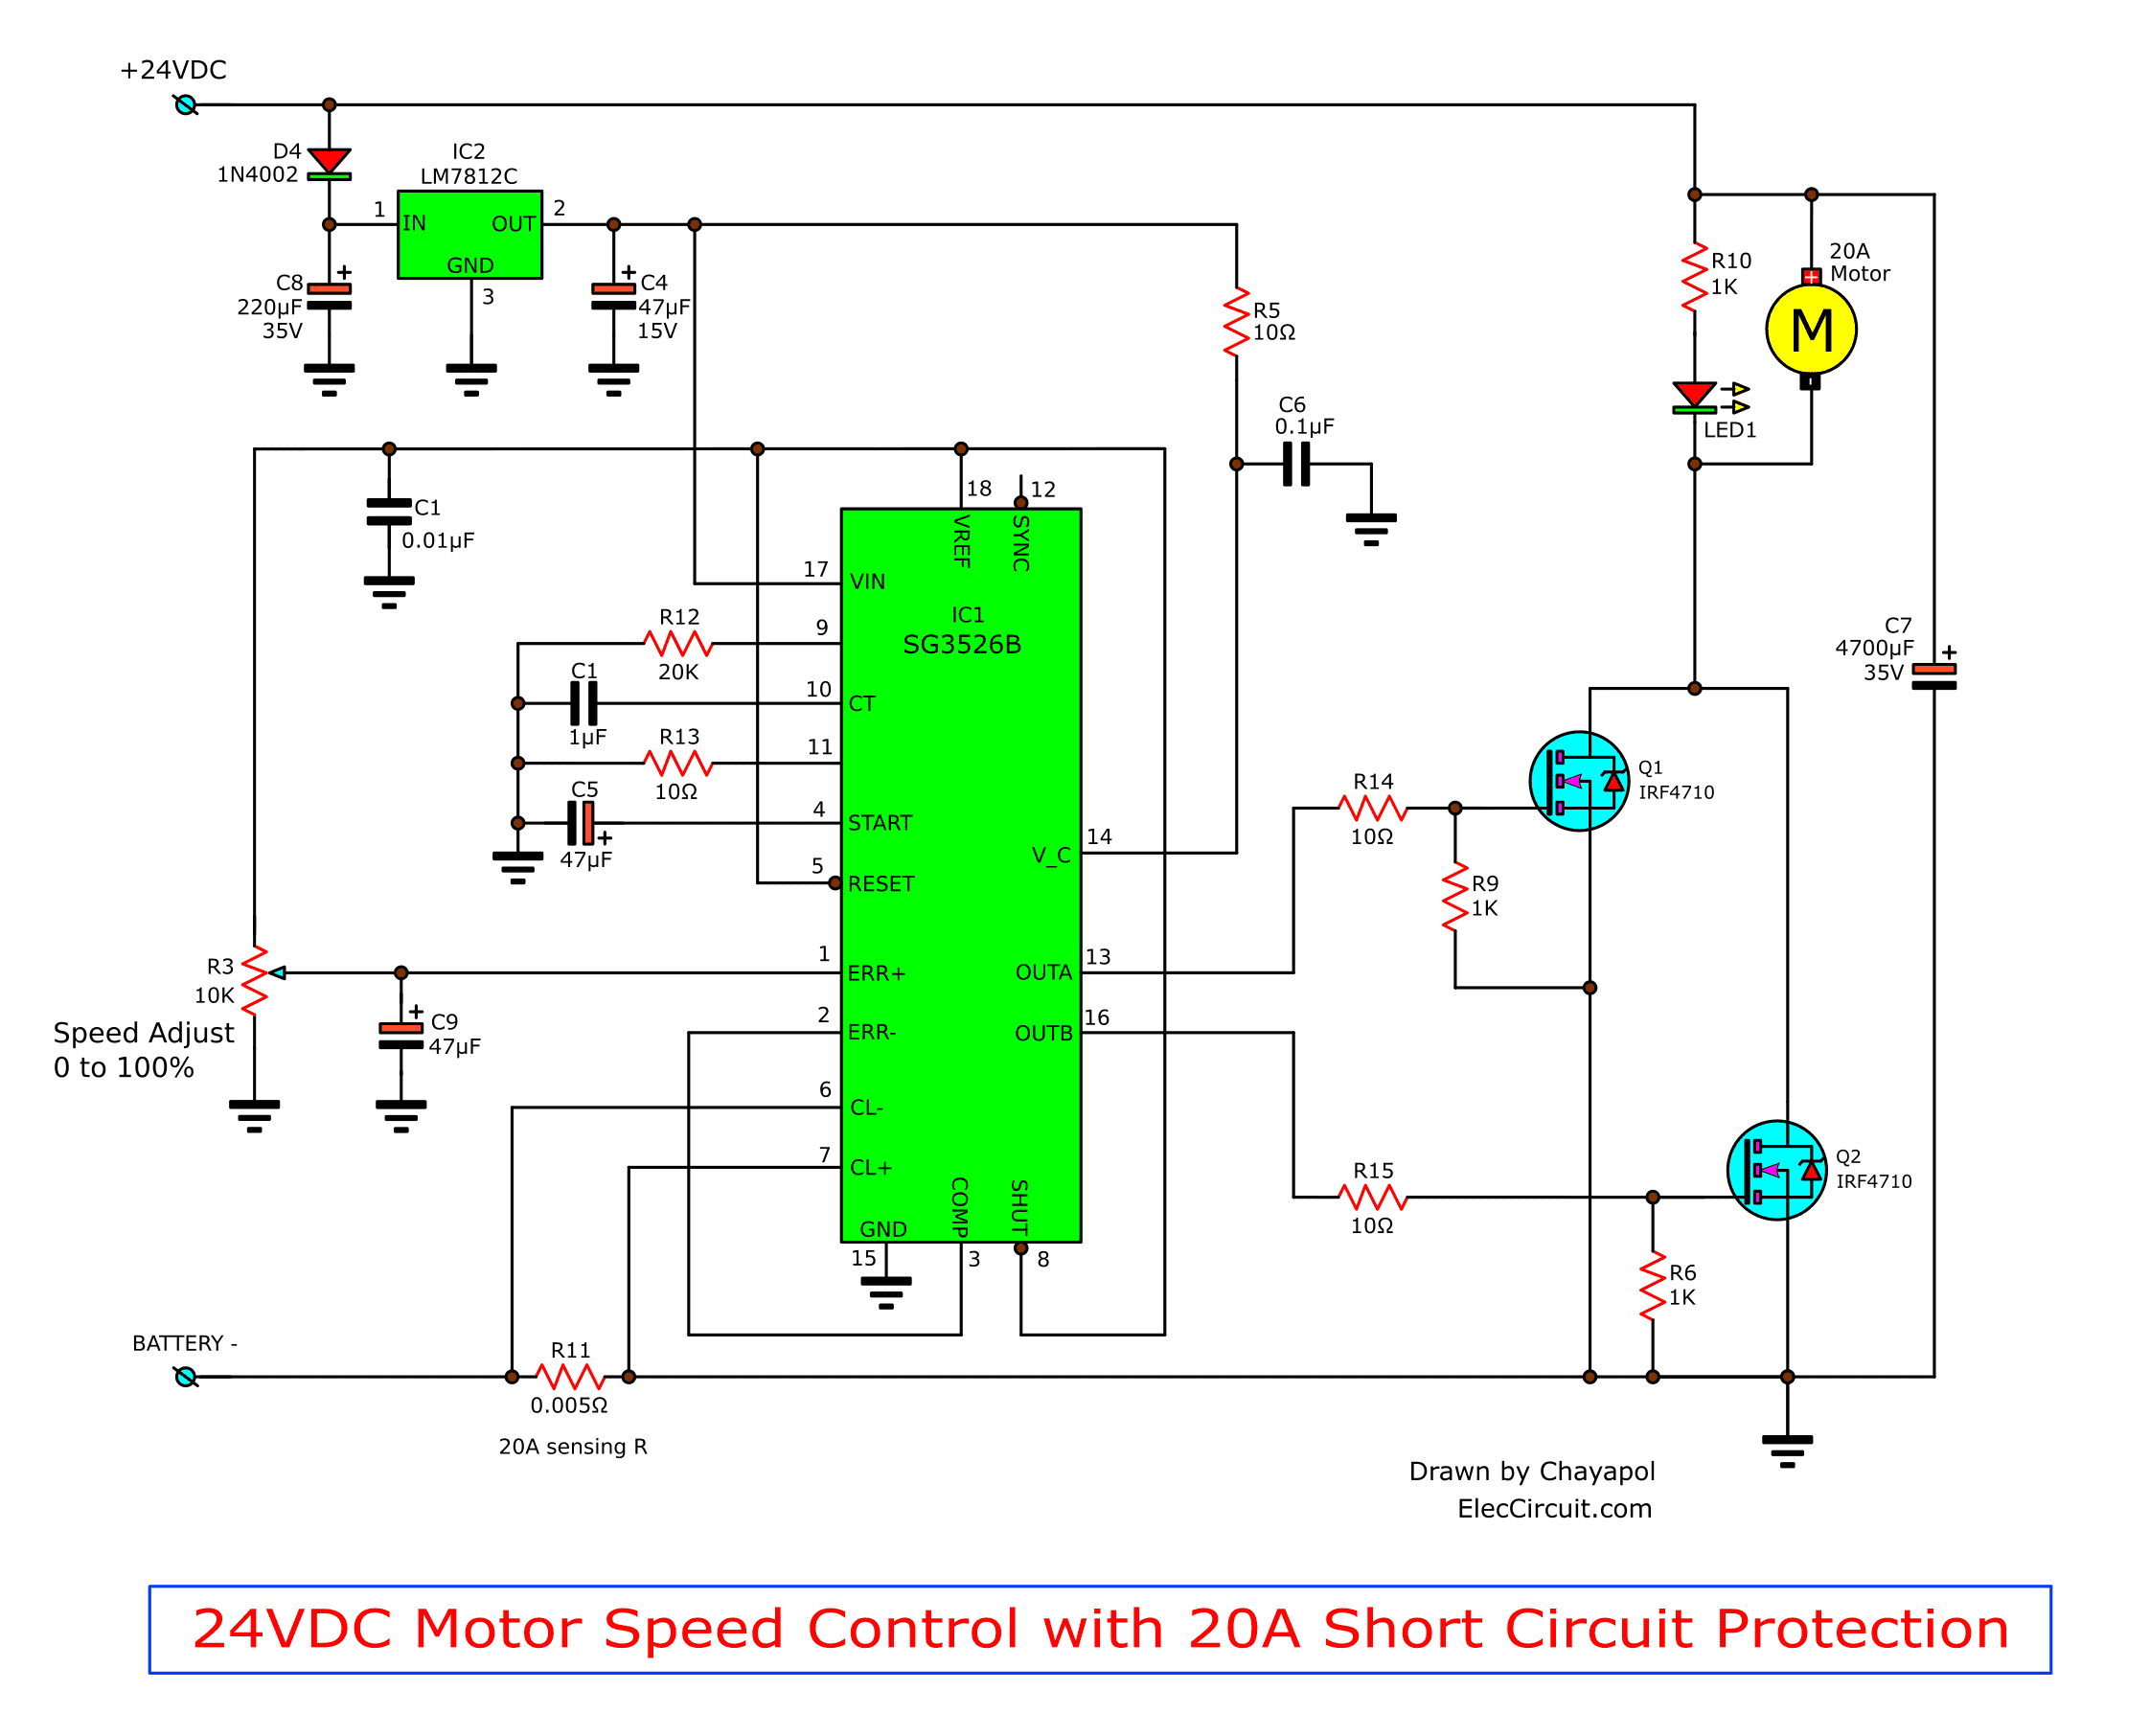 24V DC motor controller with 20A Shot Circuit Protection